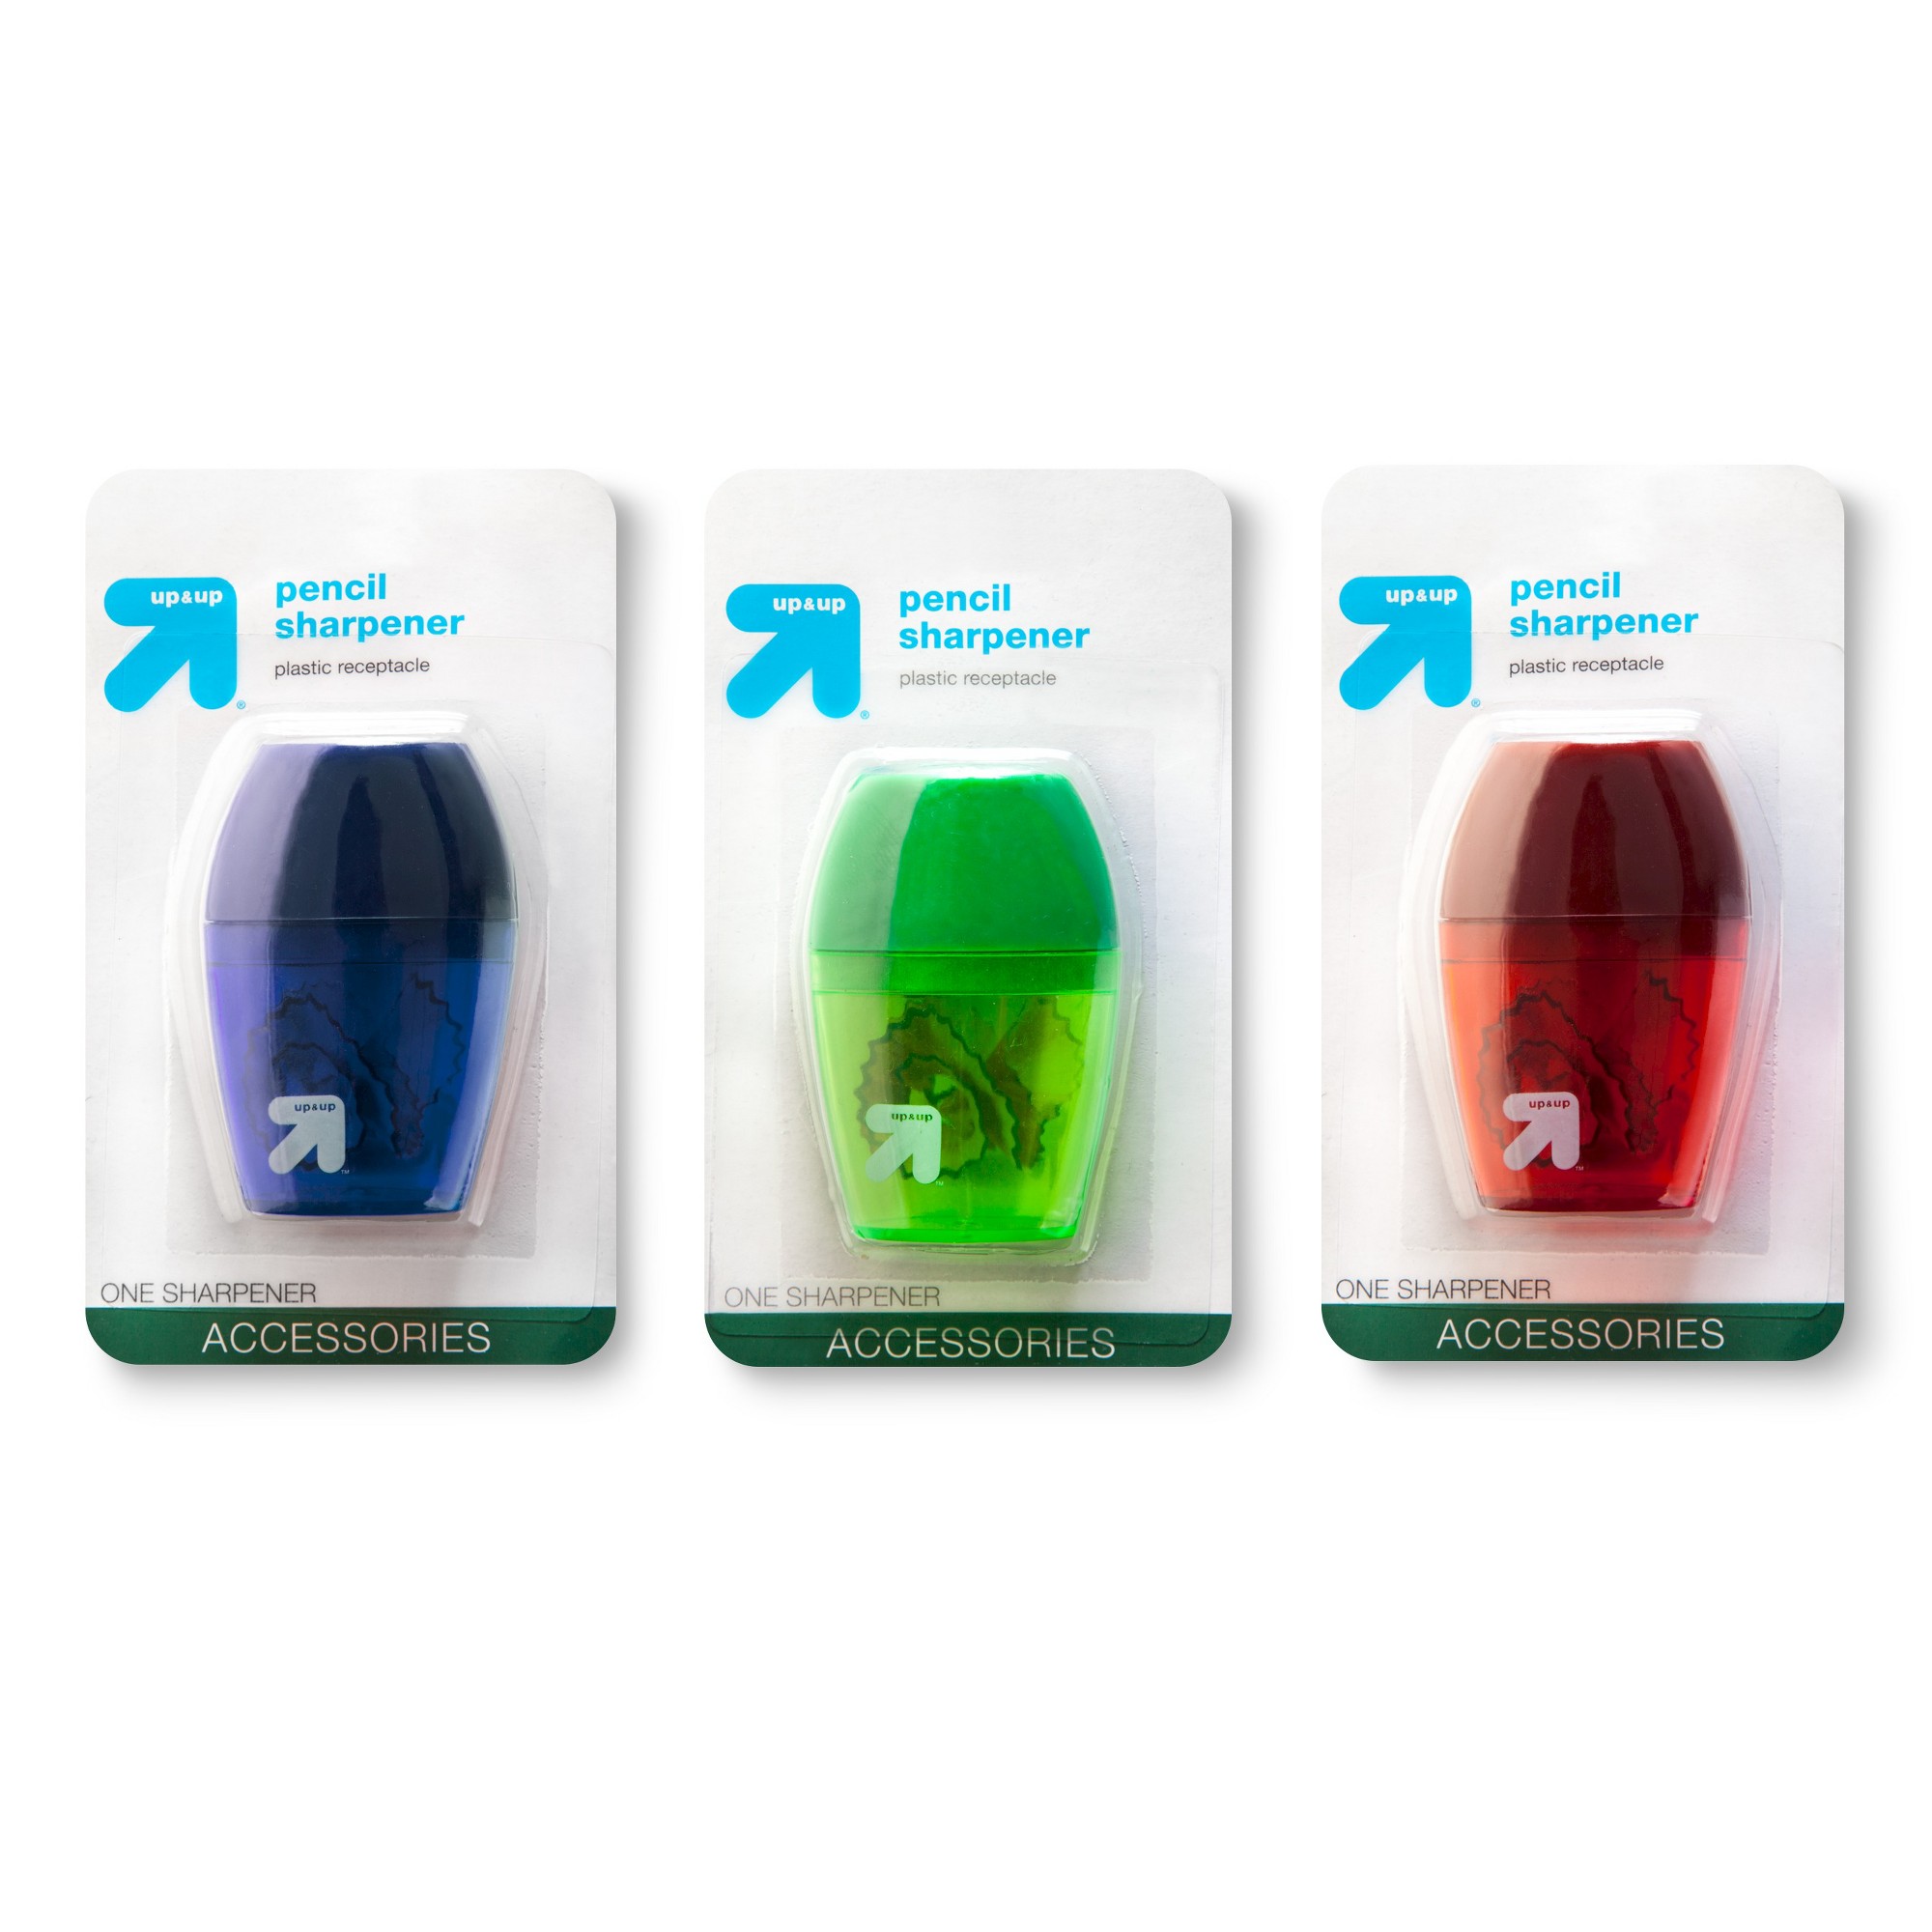 Pencil Sharpener 1 Hole 1ct Colors Vary - Up&Up